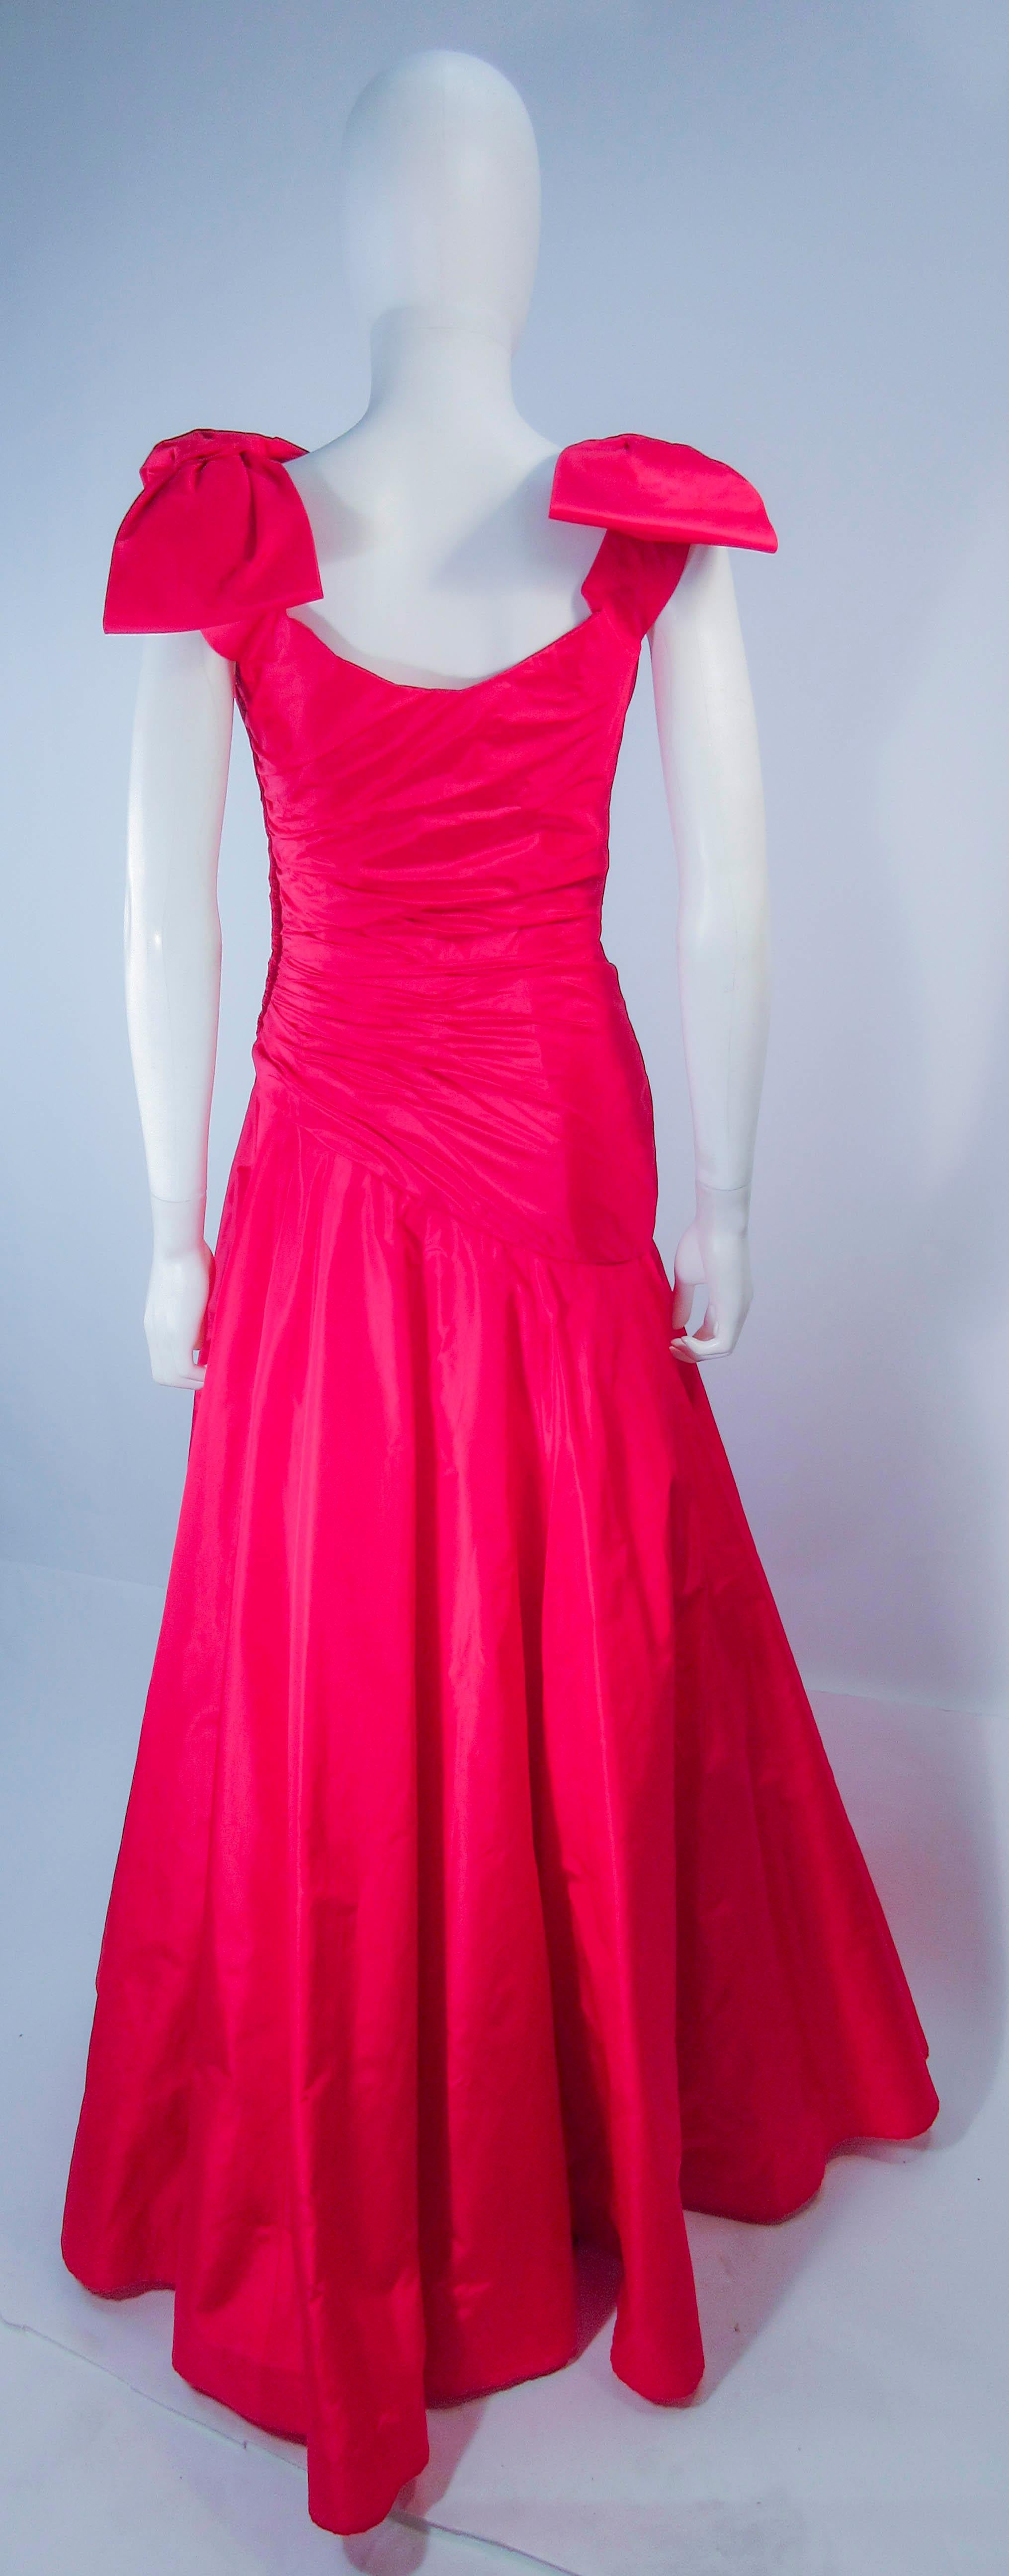 Murray Arbeid Red Ruched Taffeta Gown with Bow Details  6